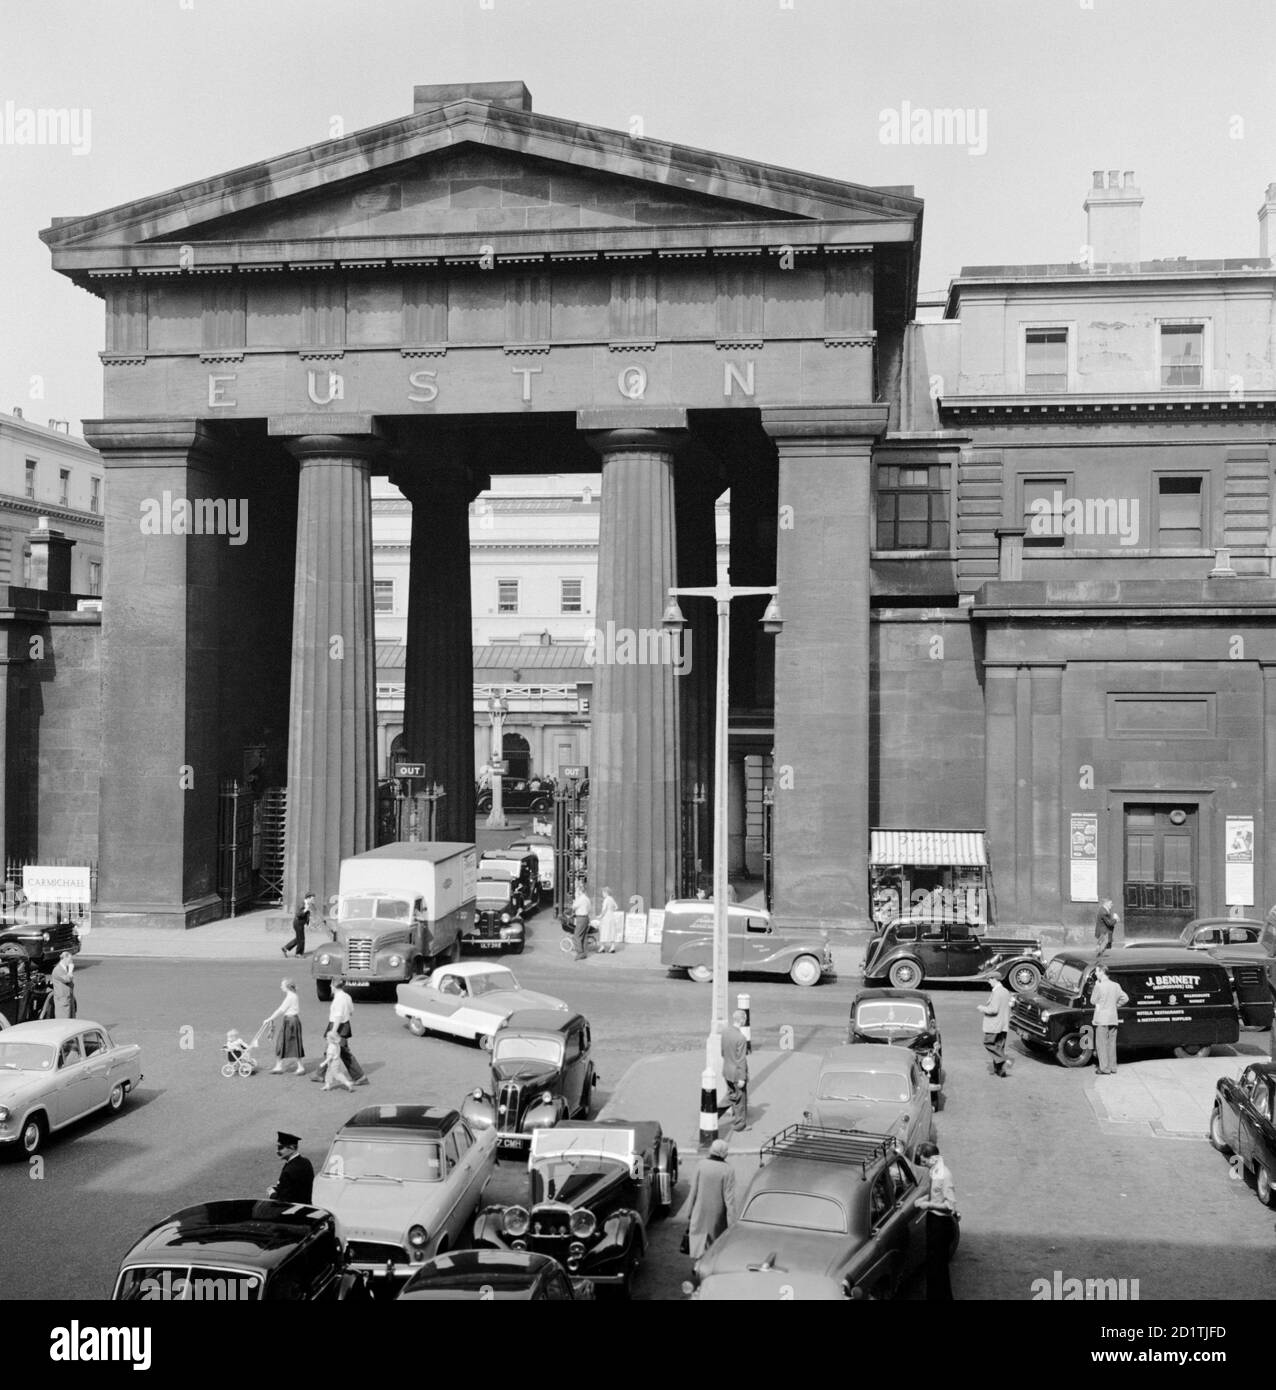 EUSTON ARCH, Euston Station, Euston Road, Camden Town, London. Traffic outside the Euston Arch. The arch was designed by Philip Hardwick in 1837 as part of a screen and portico around the station forecourt. It was demolished in 1963. Photographed in 1960 by Eric de Mare. Stock Photo